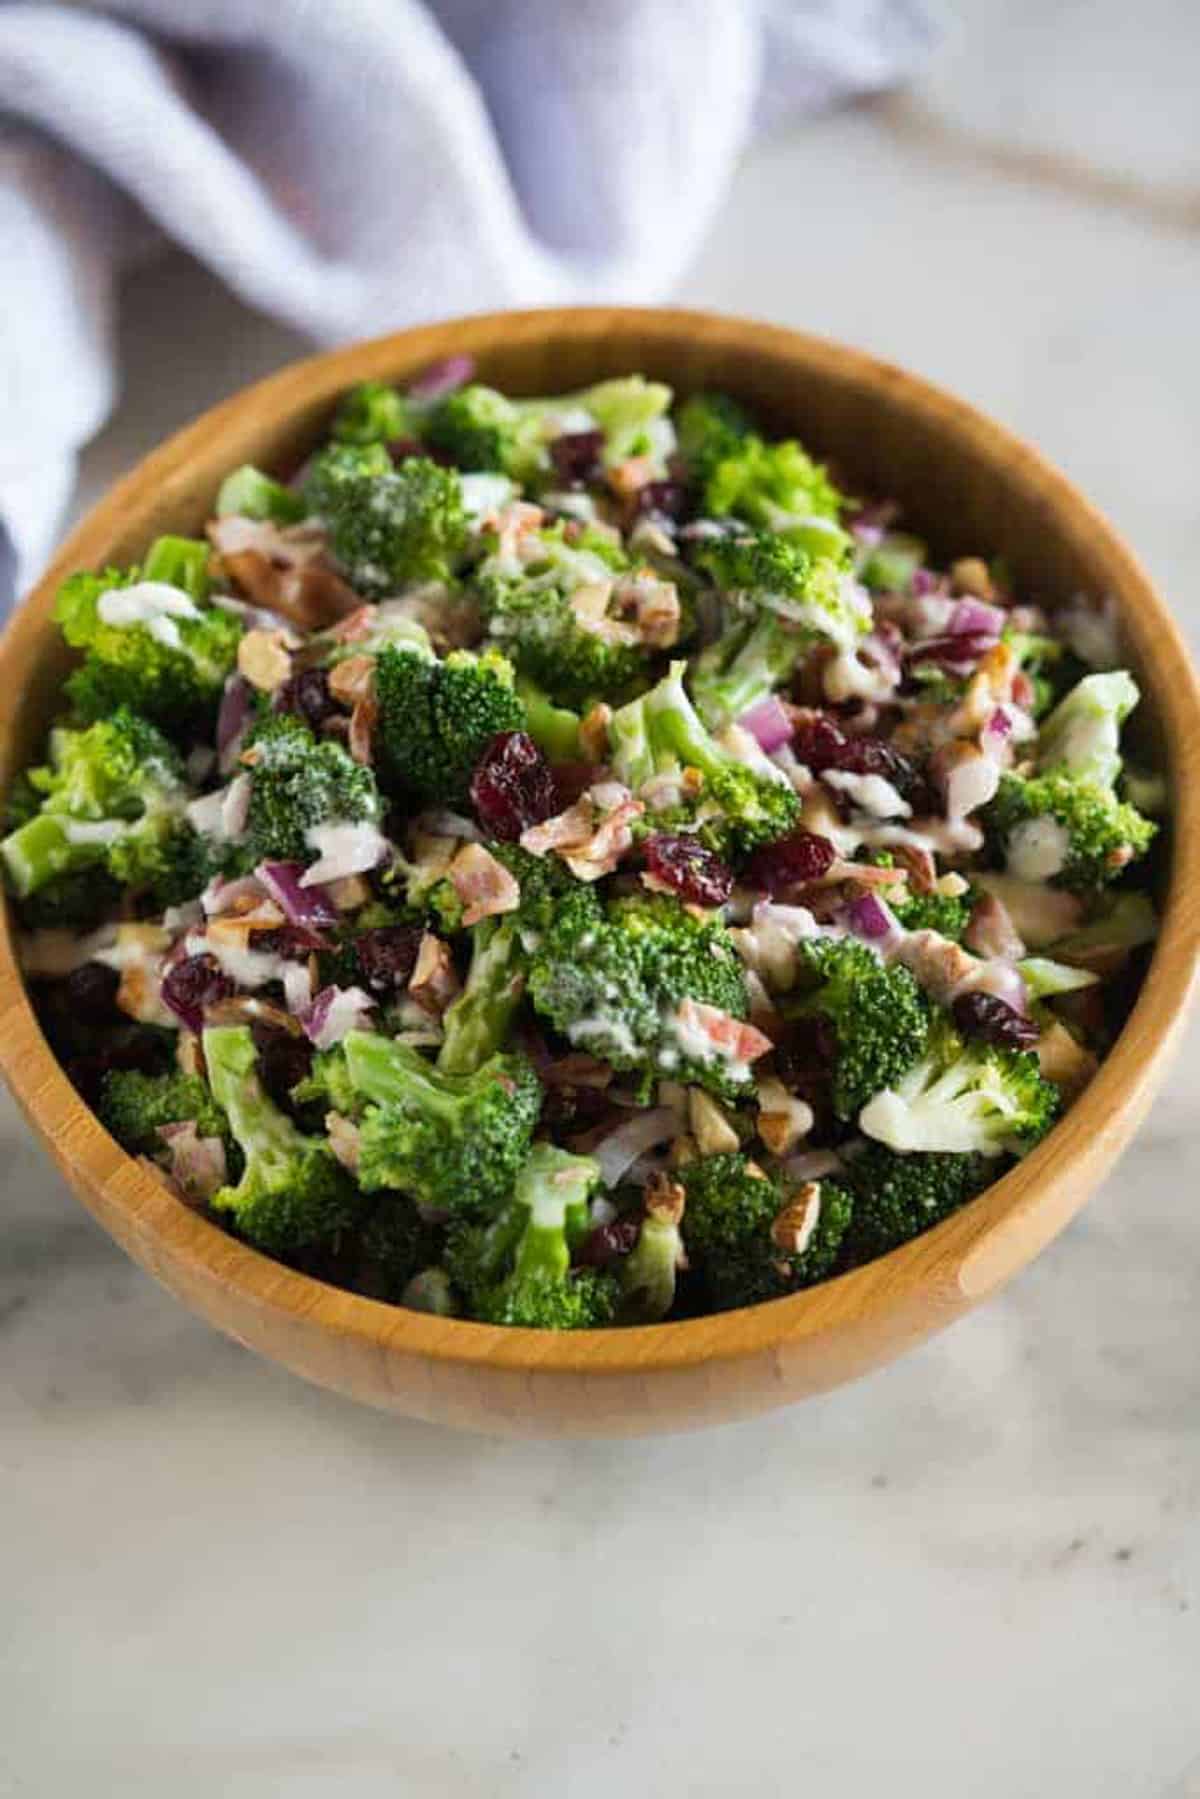 Broccoli Salad in a large wooden bowl with pieces of bacon, craisins, and a delicious dressing.